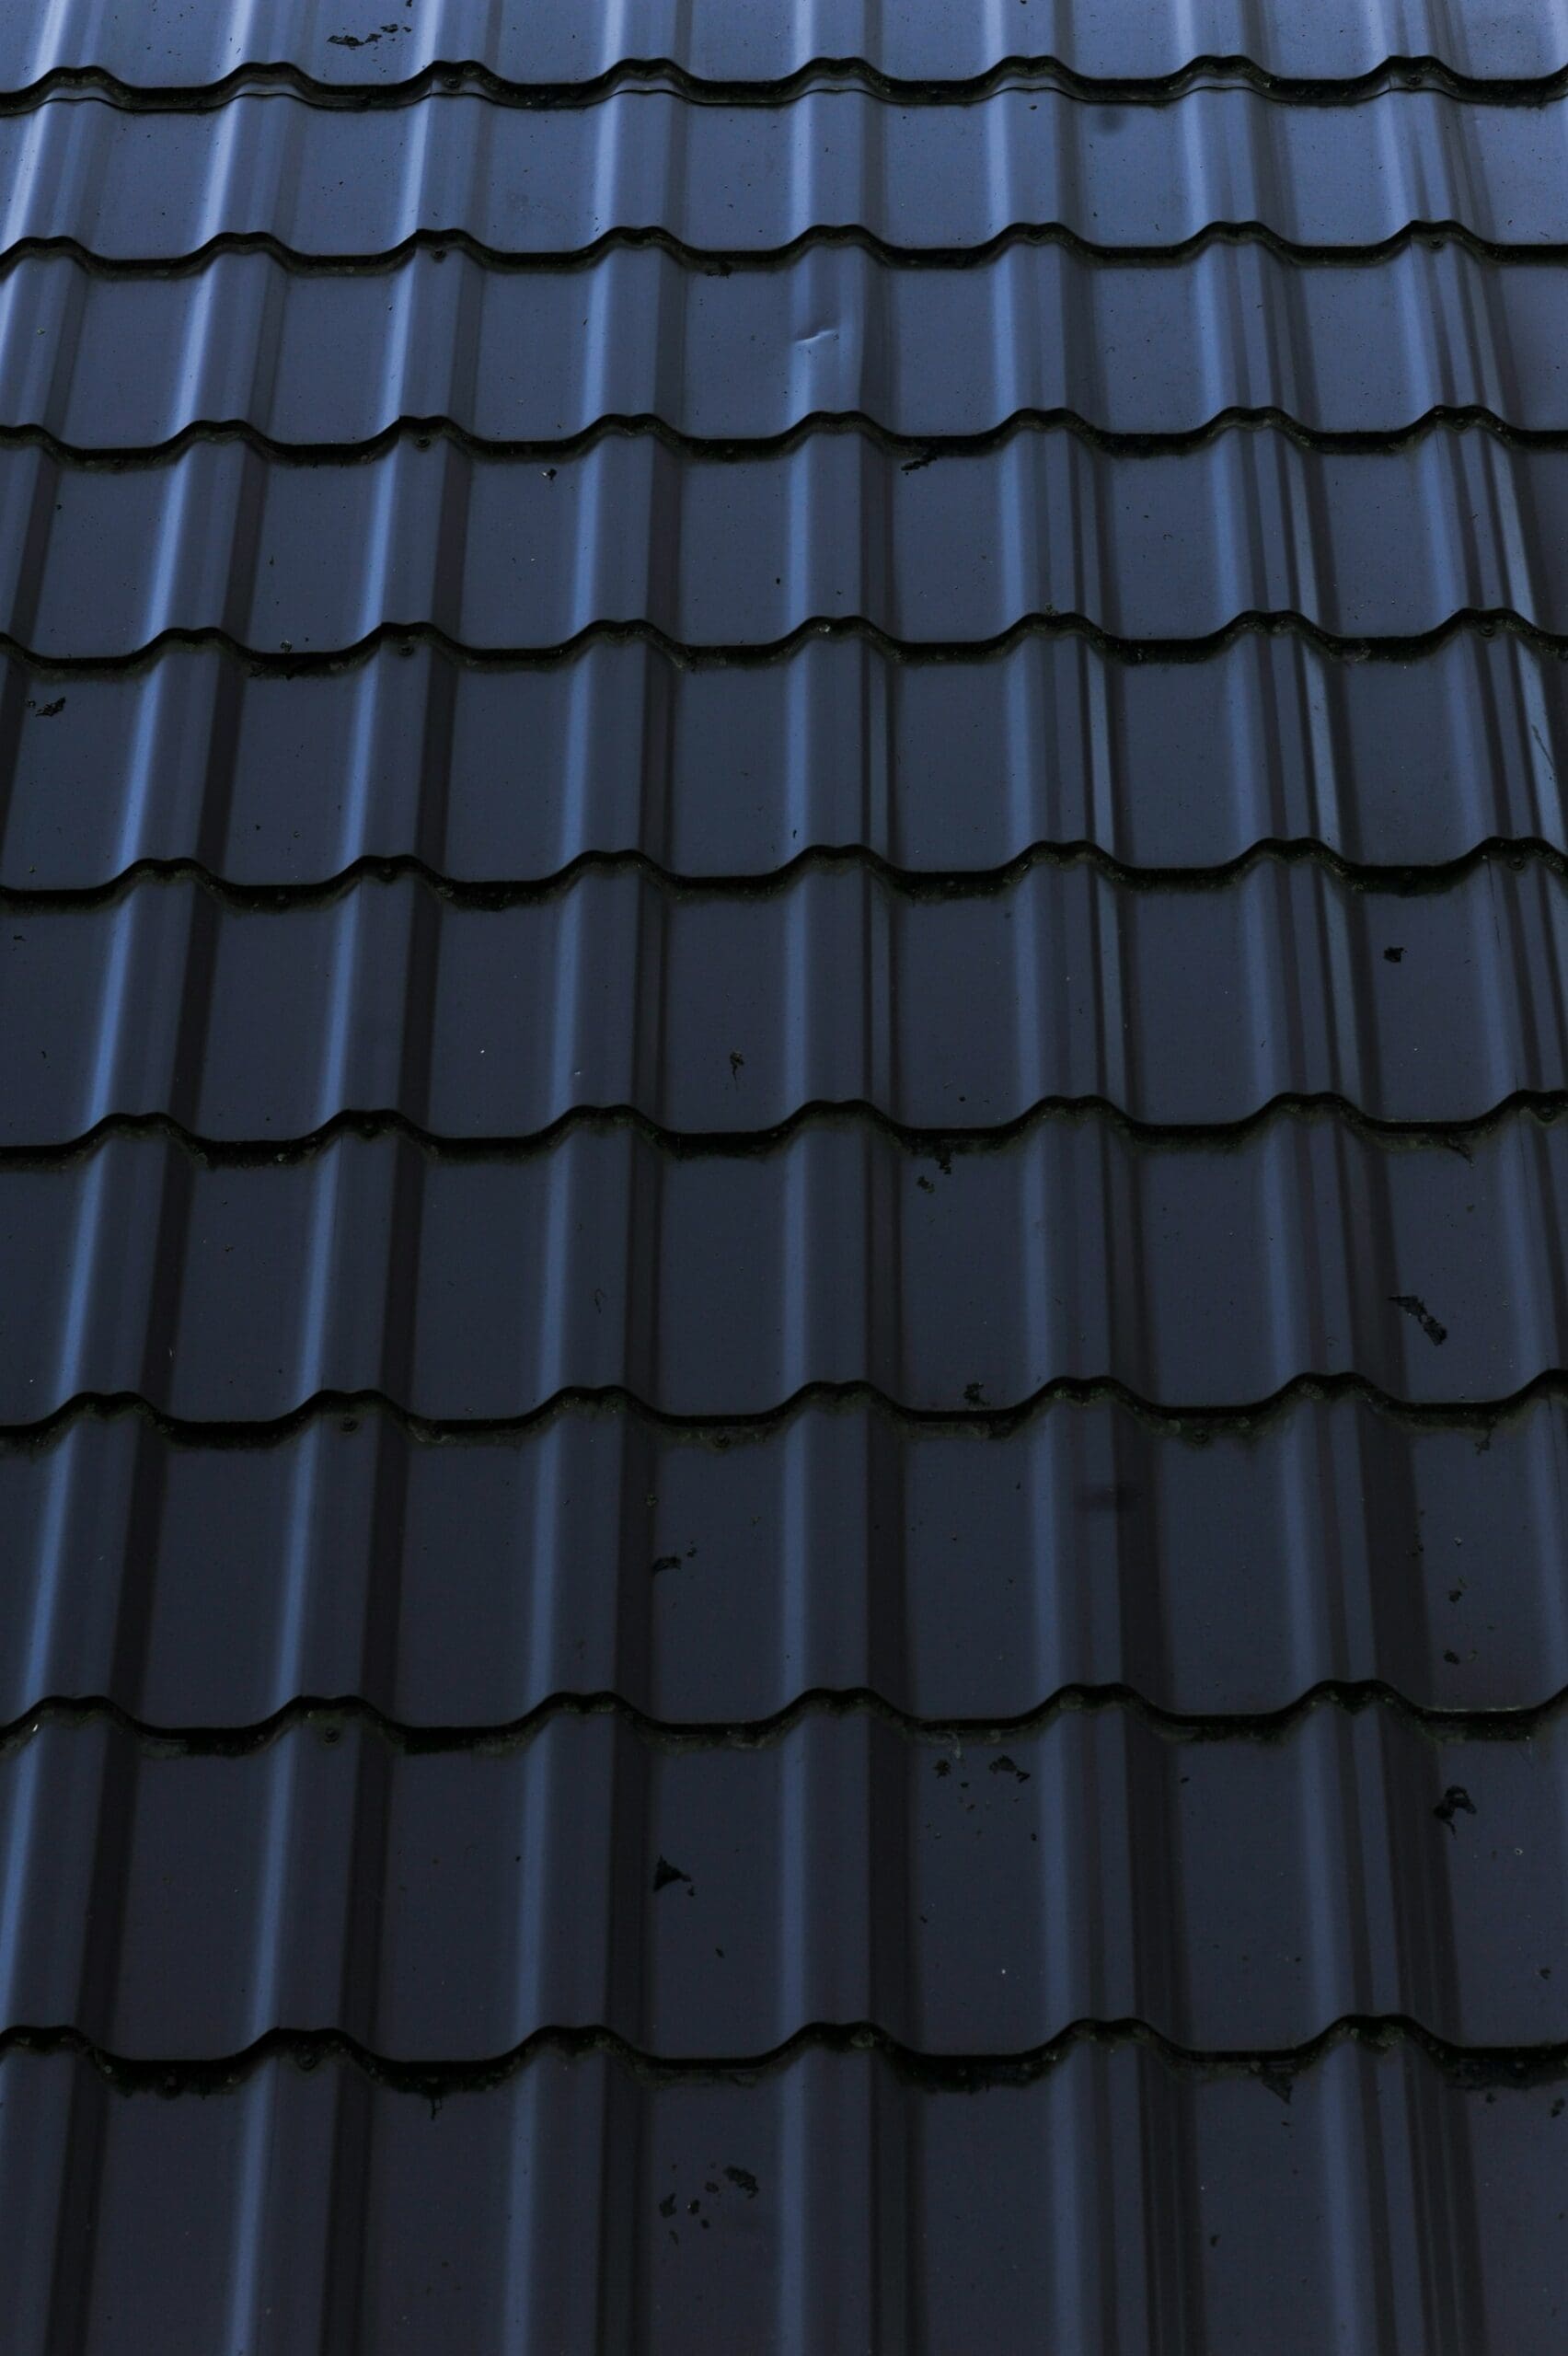 A Comprehensive Examination of the 3 Best Warranties for Various Roof Materials